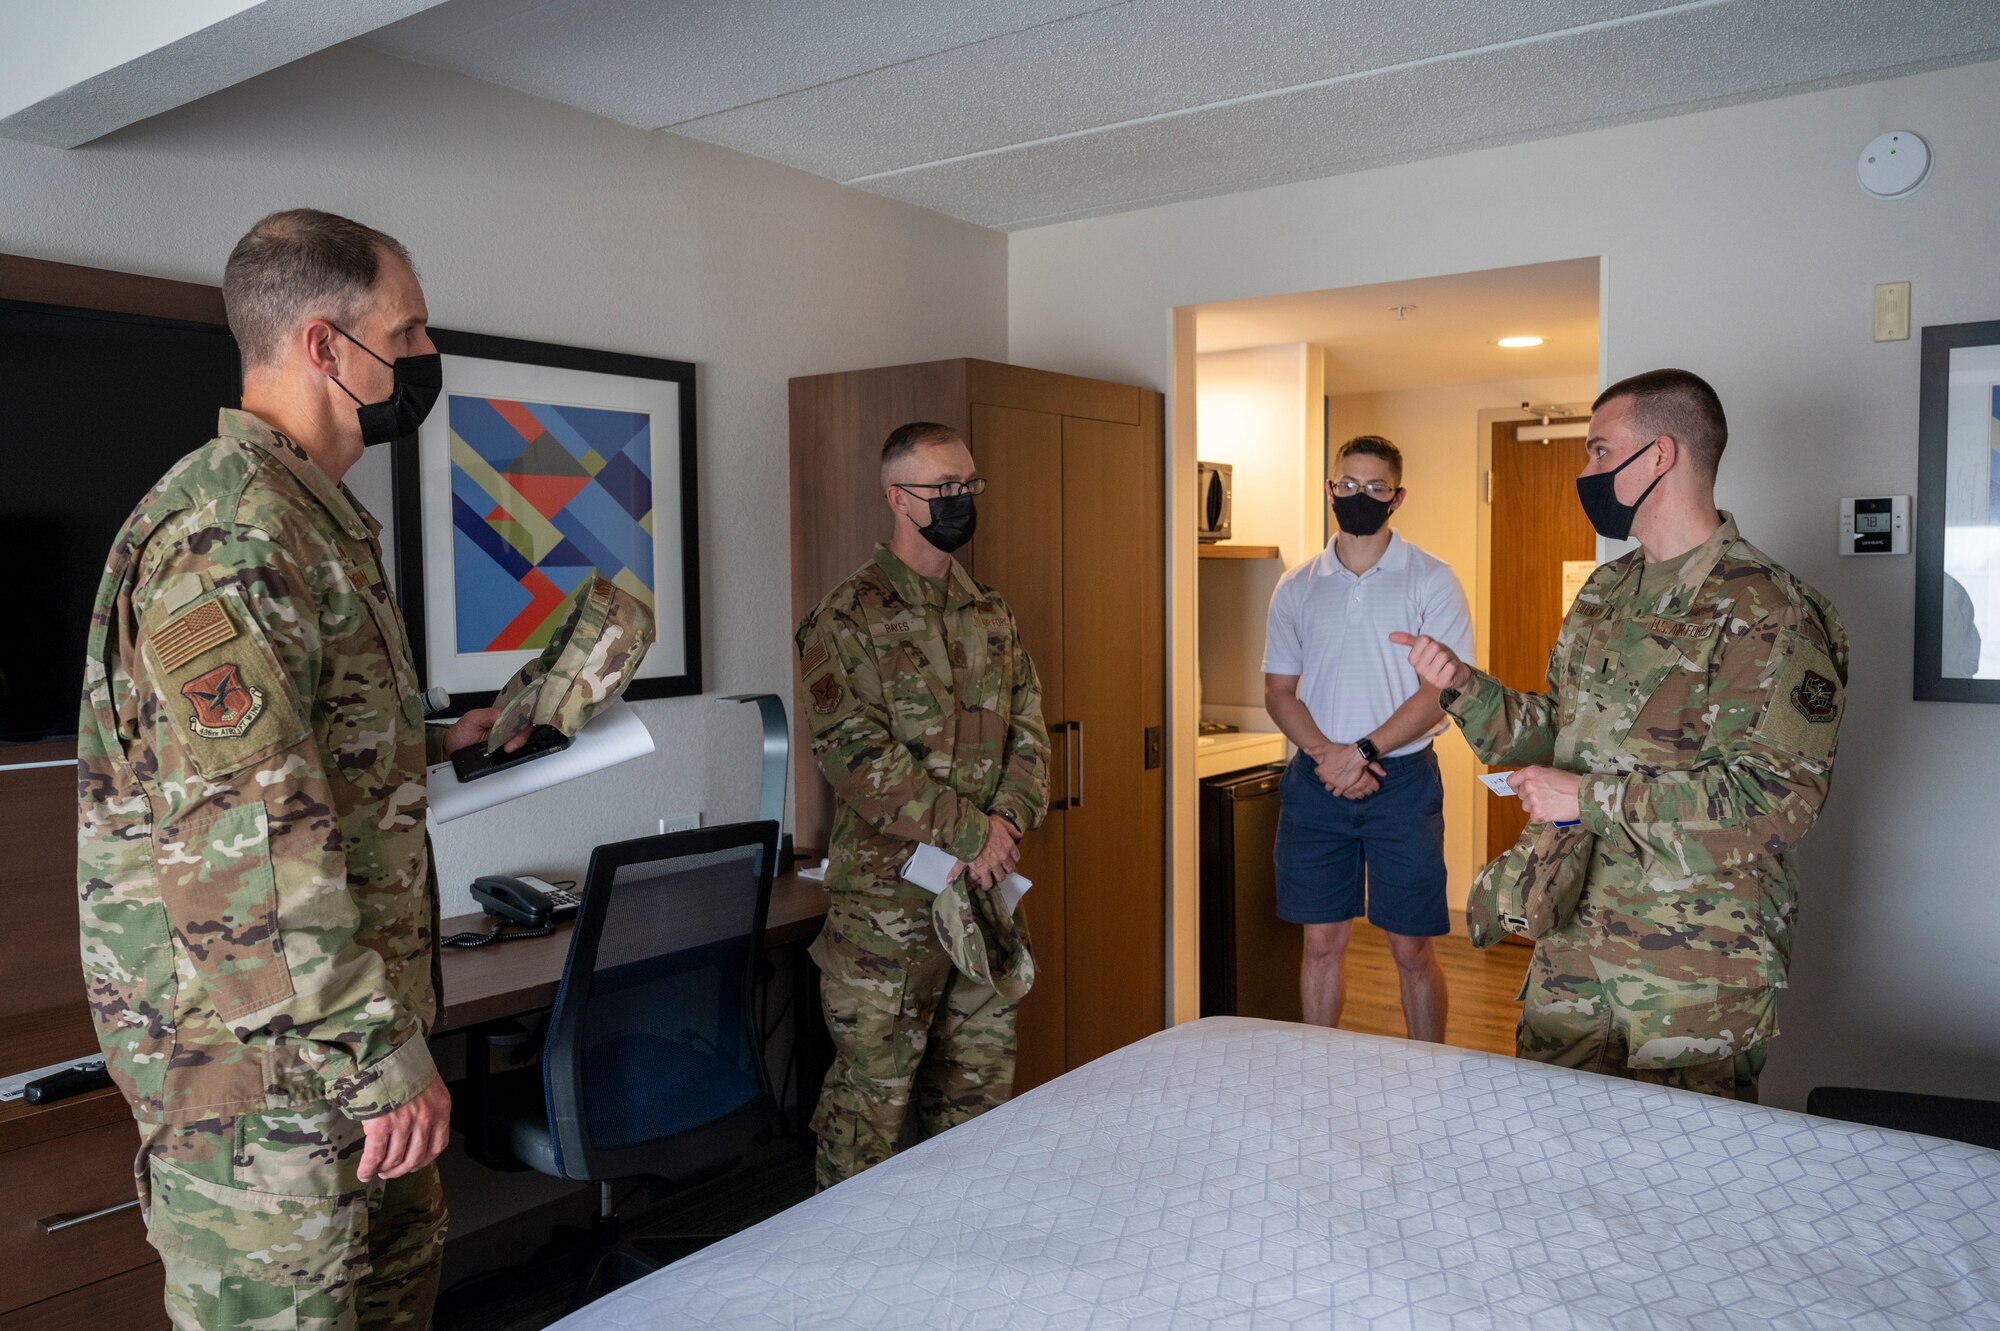 From the left, Col. Matt Husemann, 436th Airlift Wing commander, and Chief Master Sgt. Timothy Bayes, 436th AW command chief, speak with Airman 1st Class Nicholas Denegre, Patriot Express COVID-19 testing site support cell driver, and 2nd Lt. Nikolaus Bihlmeyer, Patriot Express COVID-19 testing site support cell officer in charge, at a hotel in Baltimore, June 27, 2021. The hotel serves as an isolation location for service members who test positive at the Patriot Express testing site. Team Dover and other Air Mobility Command Airmen have supported the mission since November 2020. (U.S. Air Force photo by Airman 1st Class Cydney Lee)